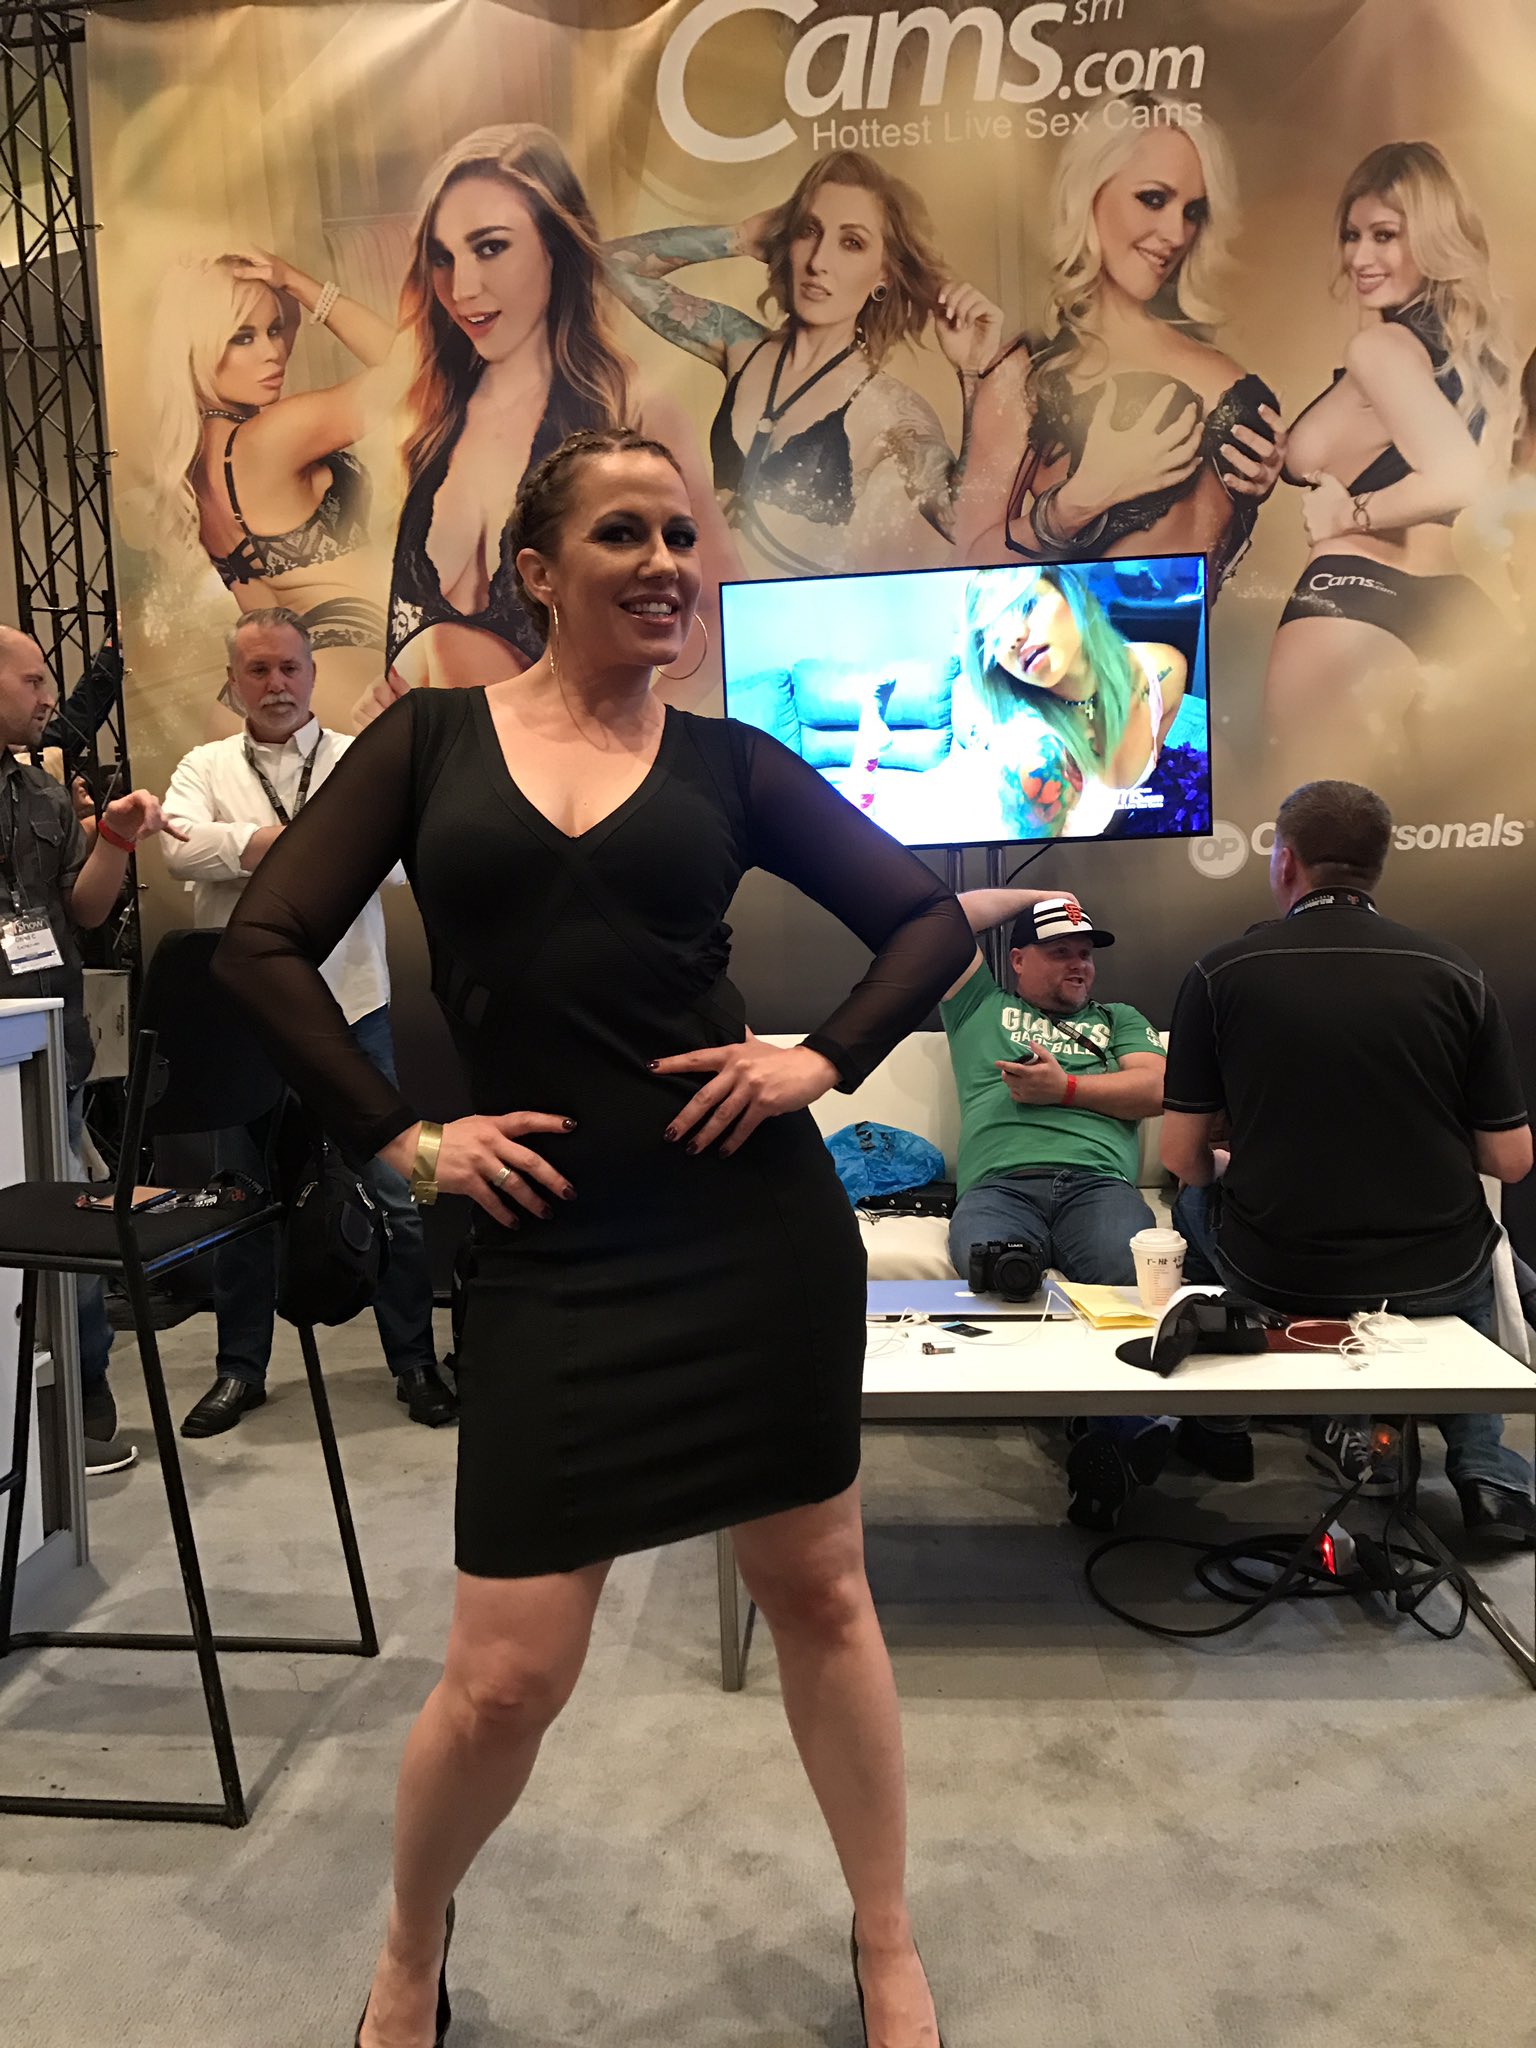 Thank you for hanging out at our booth at @AEexpo @RealInariVachs !!! ❤❤❤ https://t.co/IMKg9oRhcd